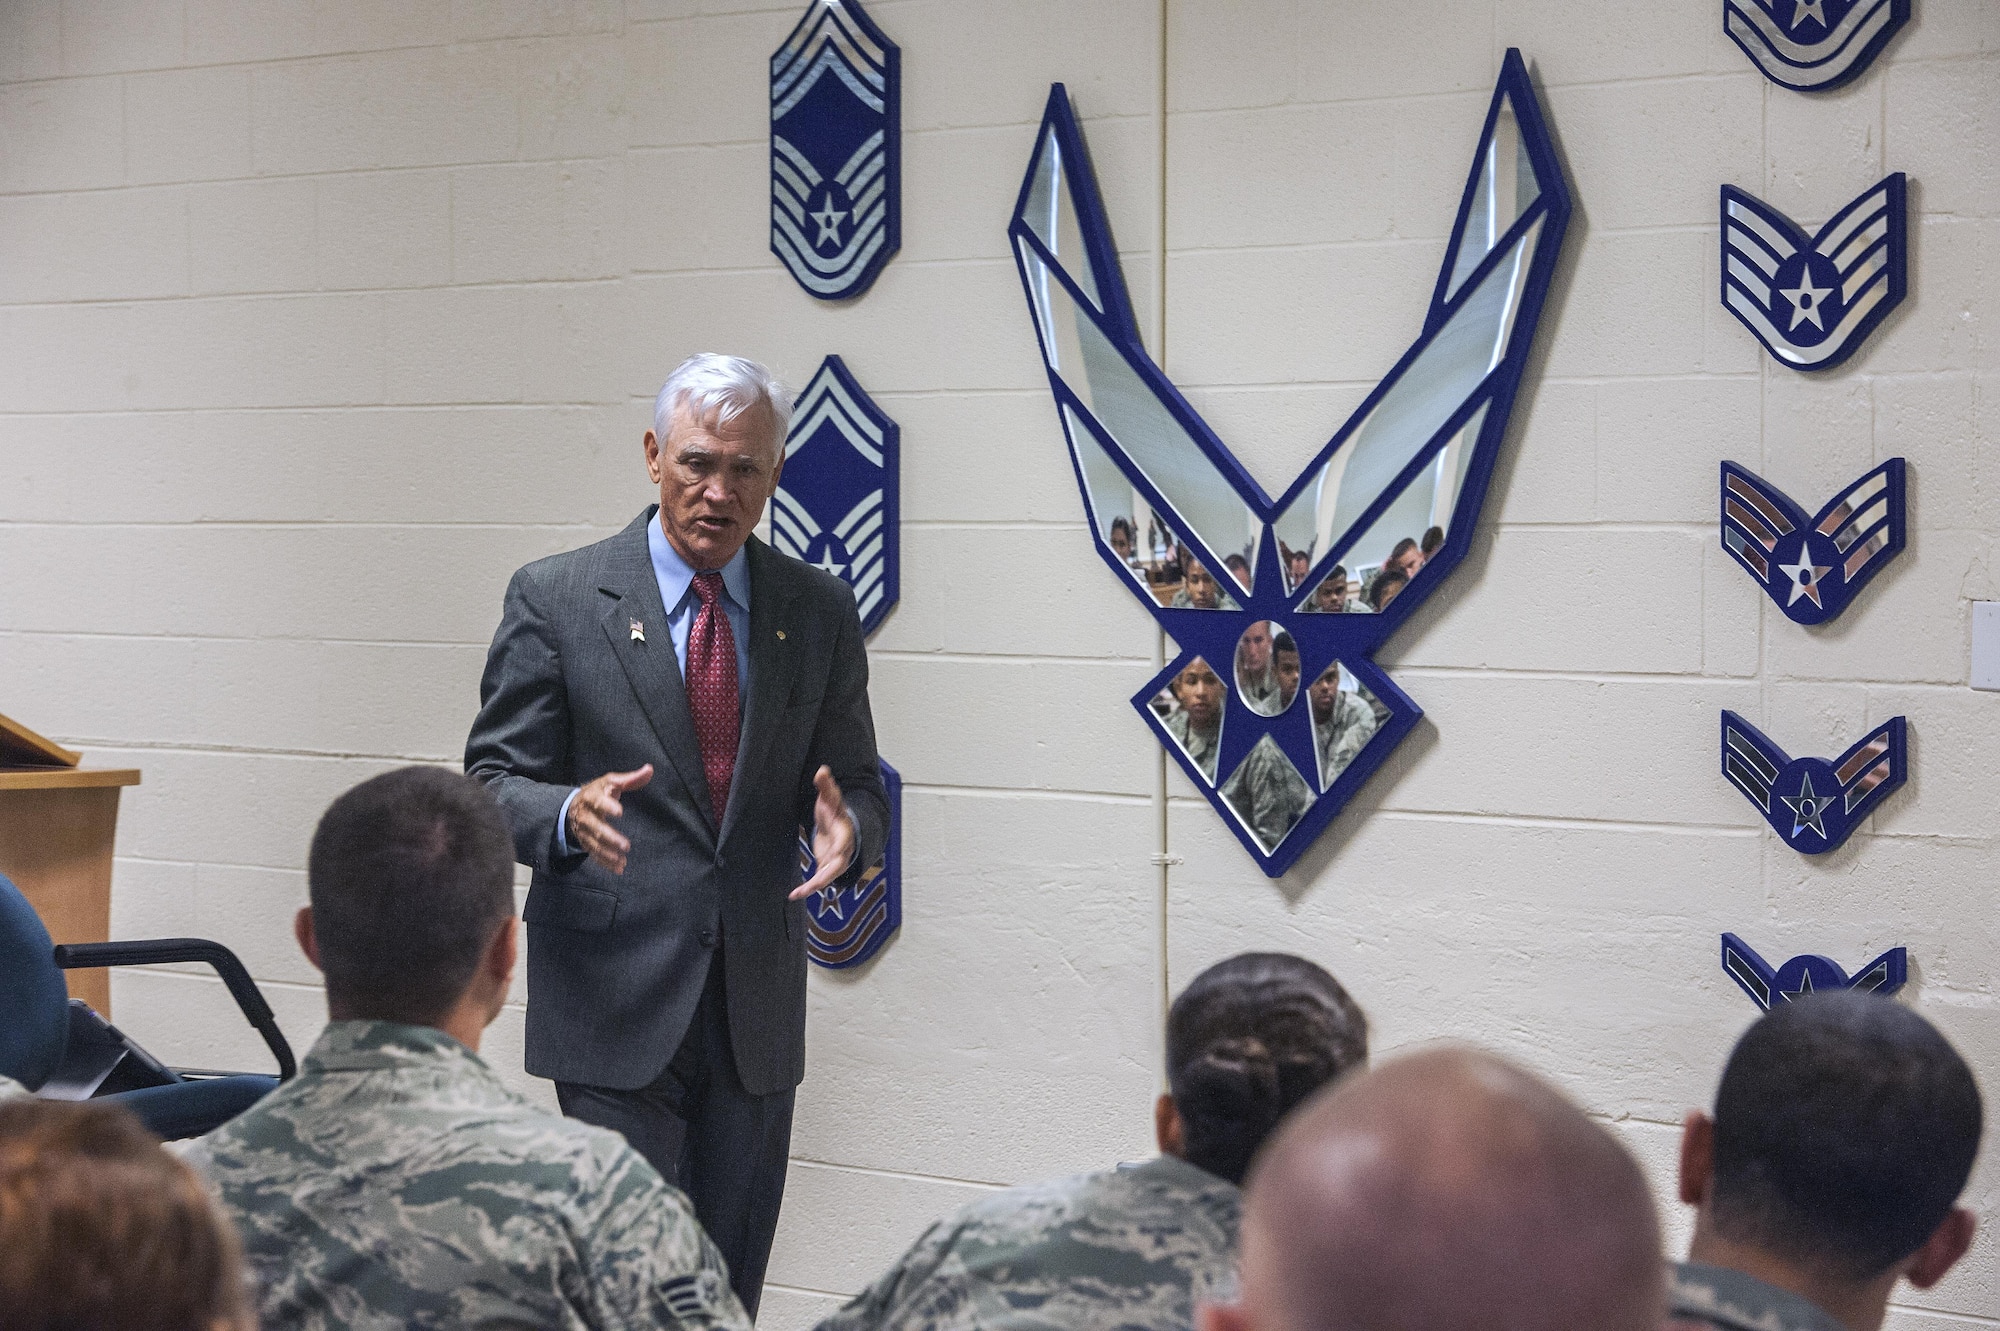 .S. Air Force Lt. Col. (Ret.) Barry Bridger, former 43rd Tactical Fighter Squadron F-4 Phantom aircraft commander, shares his story with an Airmen Leadership School class at Joint Base Langley-Eustis, Va., Sept. 15, 2016. Bridger visited the base as part of a three day tour for Prisoners of War/Missing in Action Recognition Day. He told Airmen of how he was held captive with 500 other service members from 1967 until their release in 1973. (U.S. Air Force photo by Staff Sgt. Nick Wilson)

